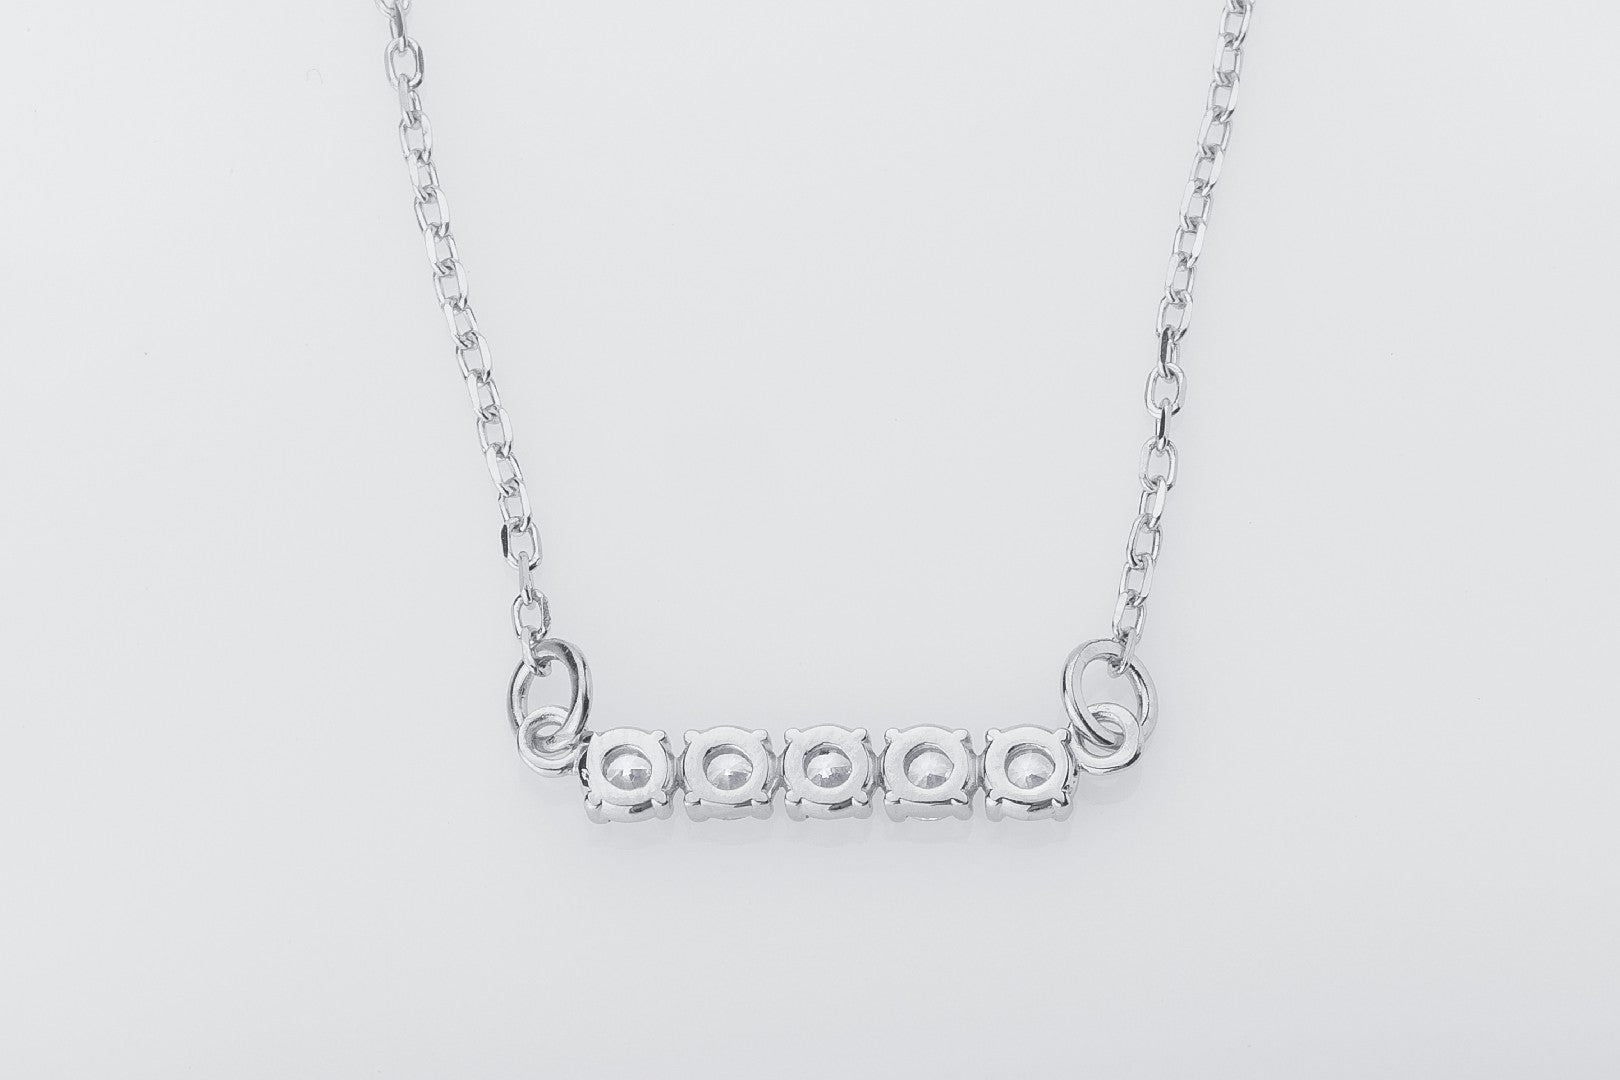 Minimalistic Necklace with Clear Gems, 925 Silver